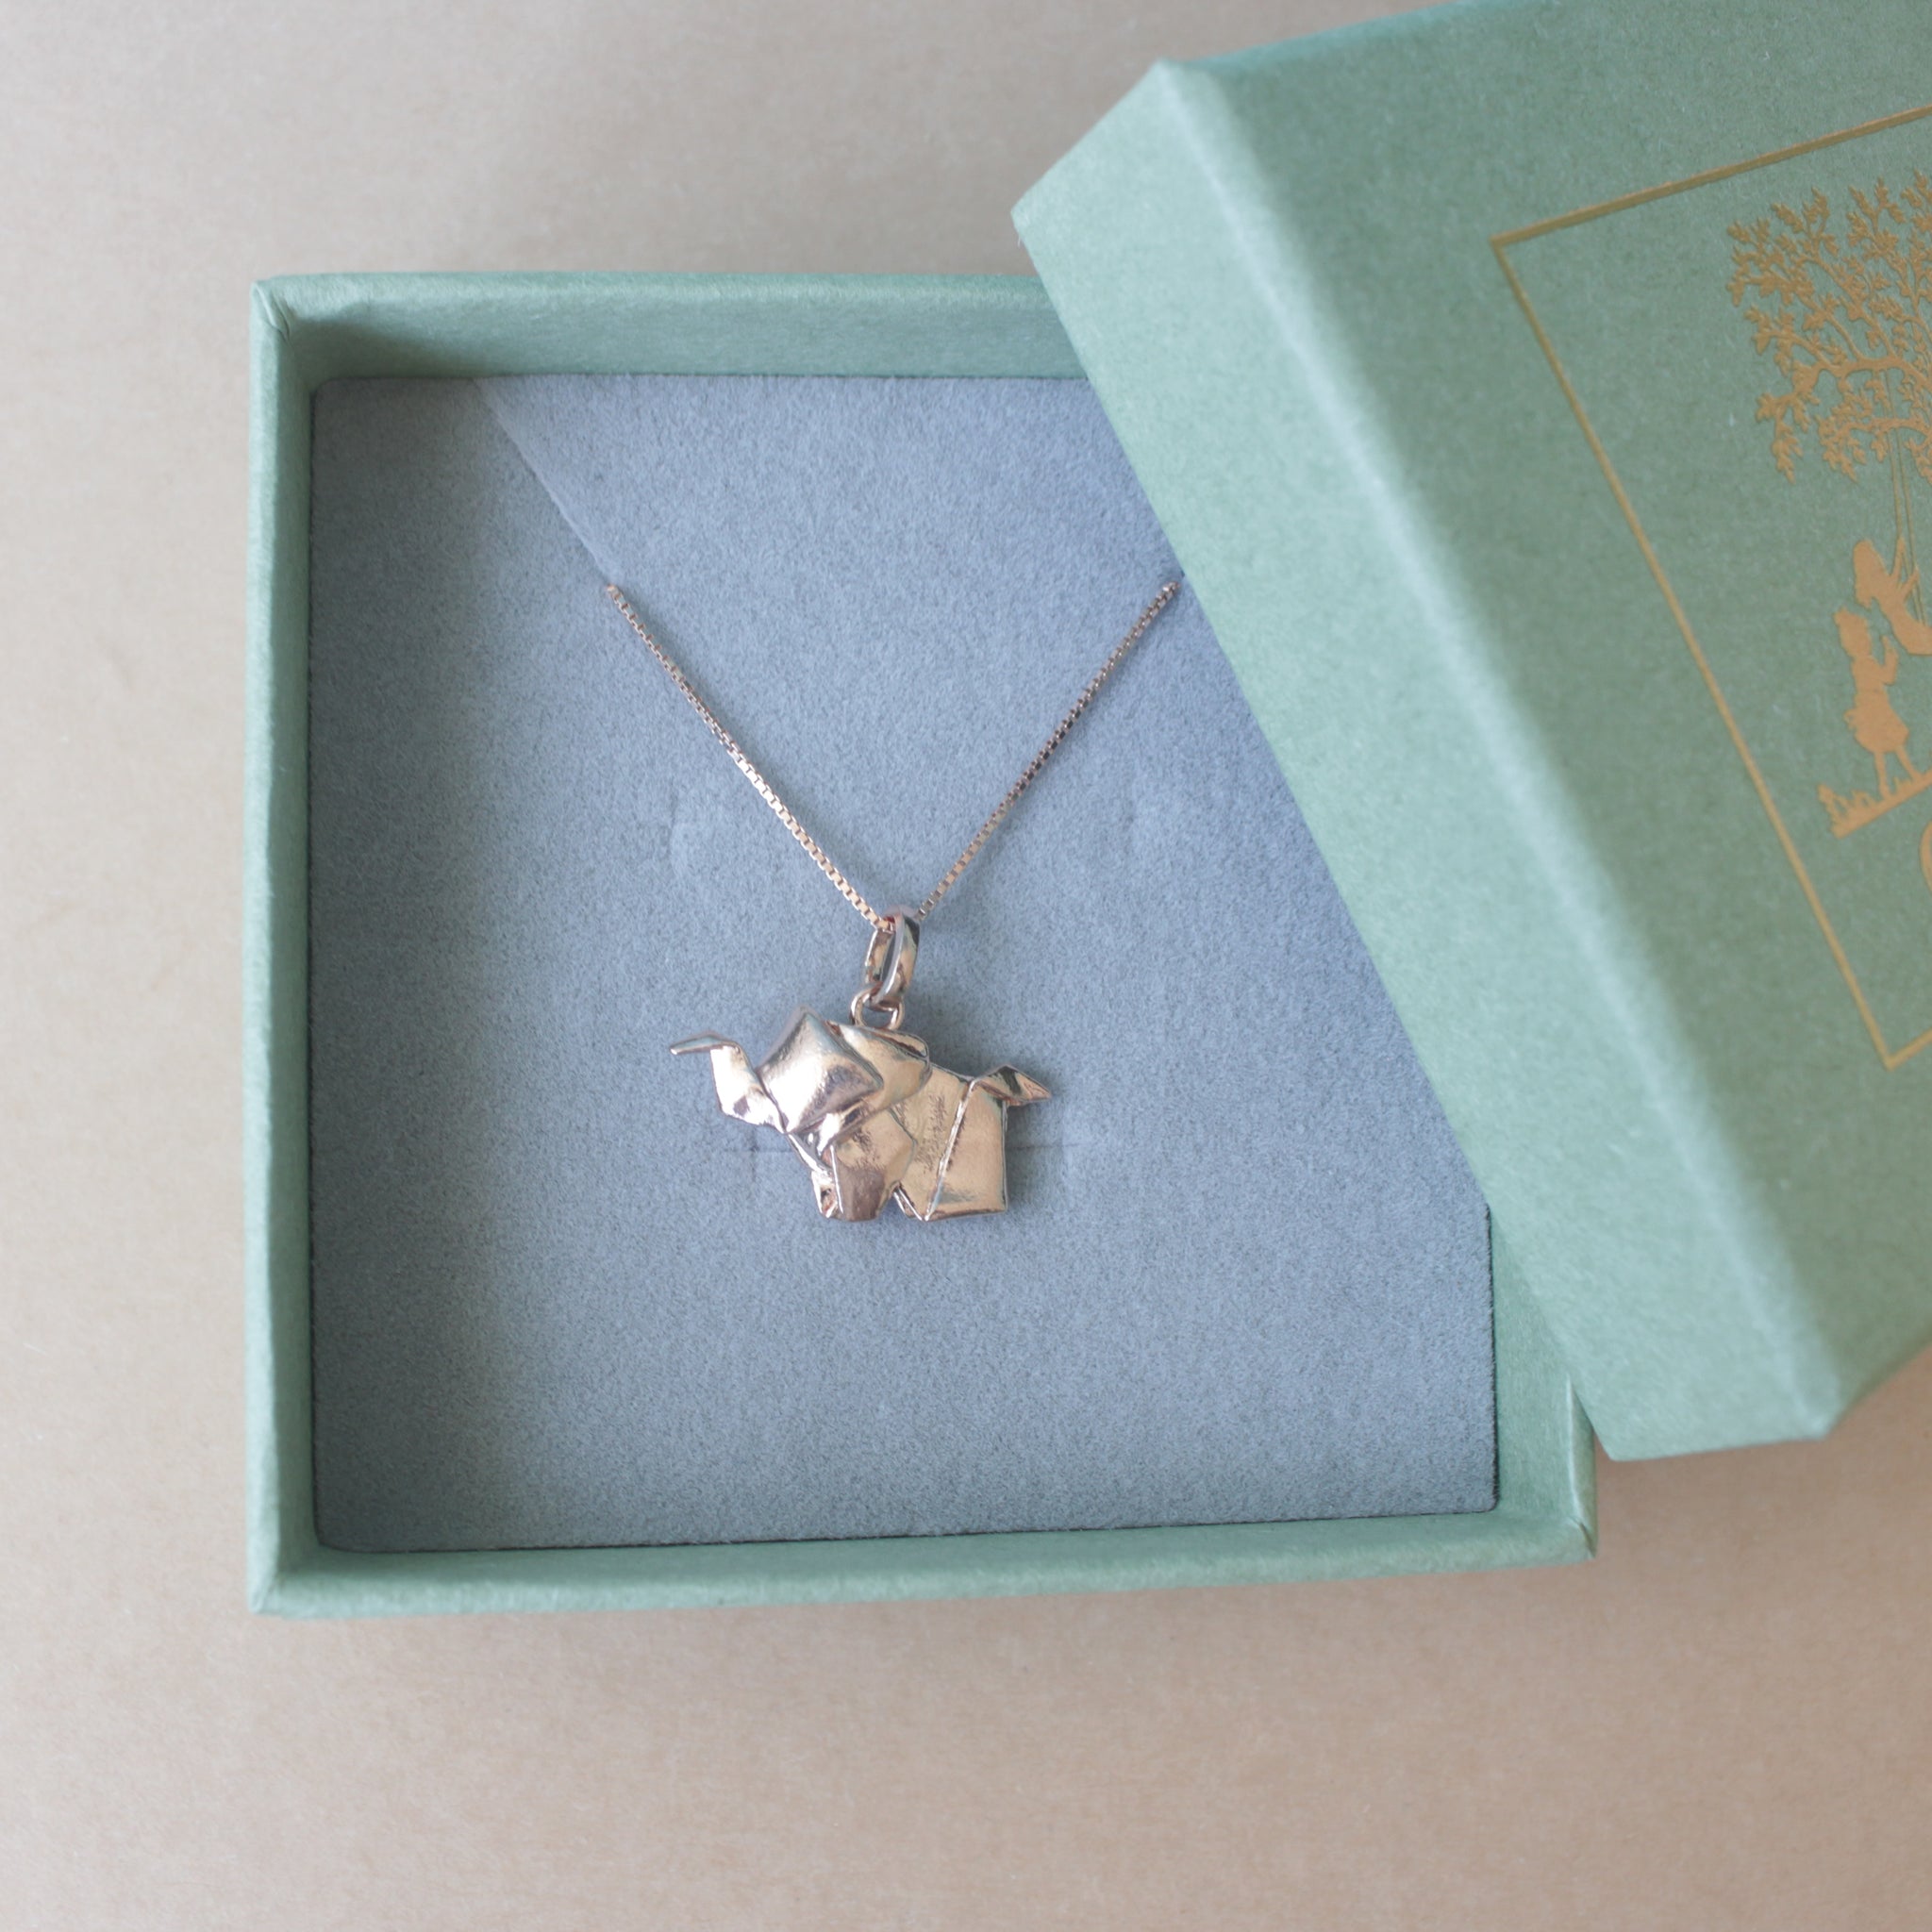 Rose Gold Plated Silver Origami Small Elephant Necklace